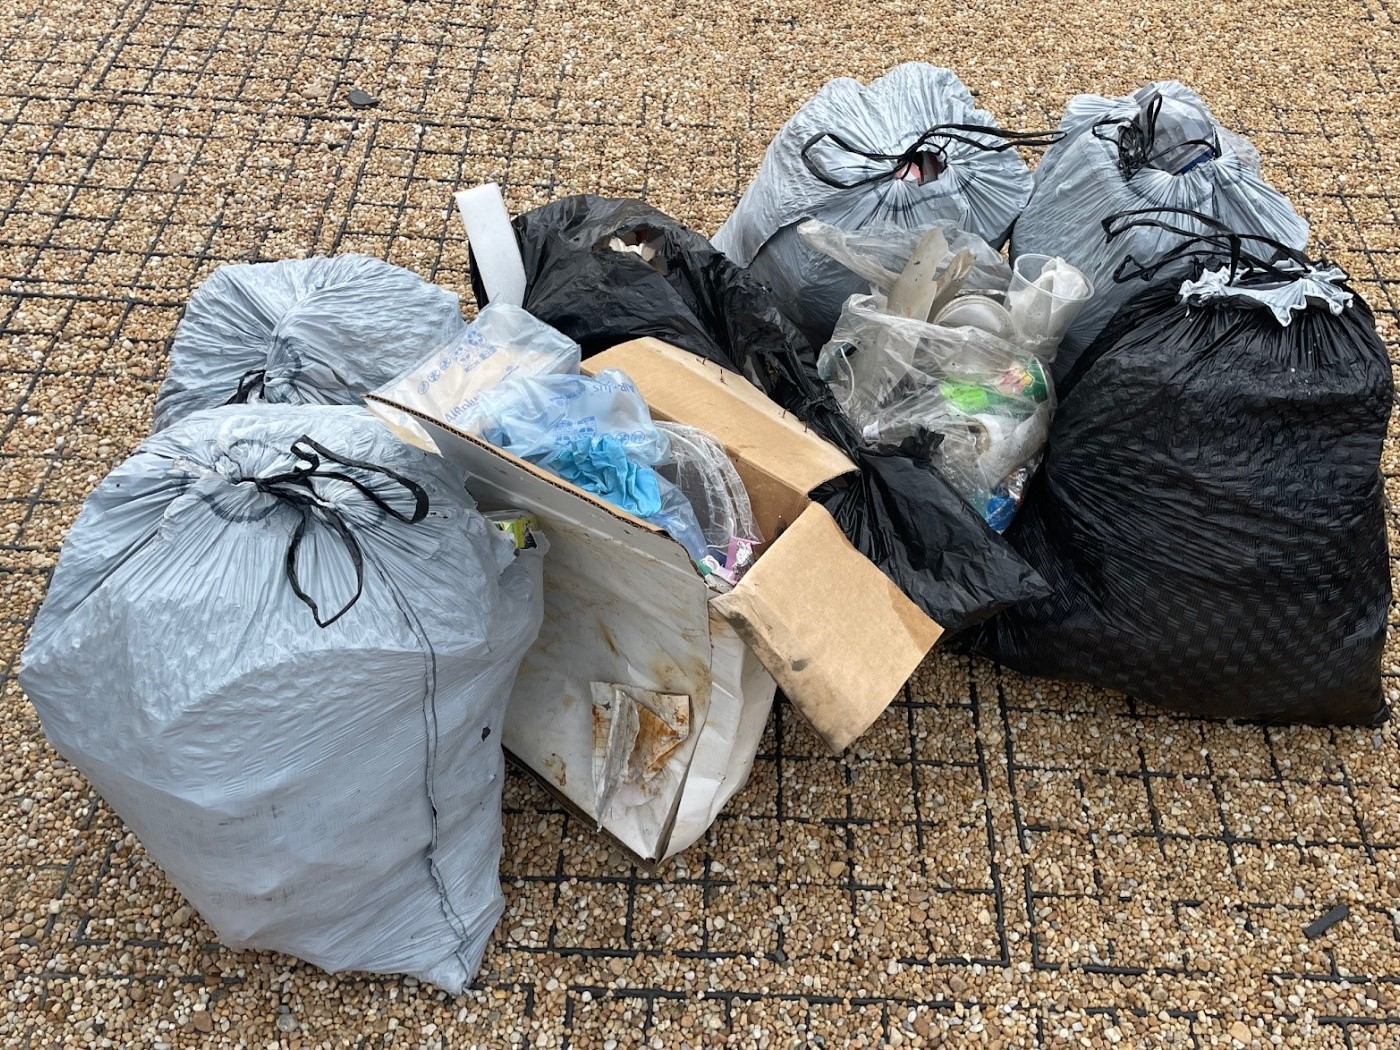 about eight trash bags filled with litter